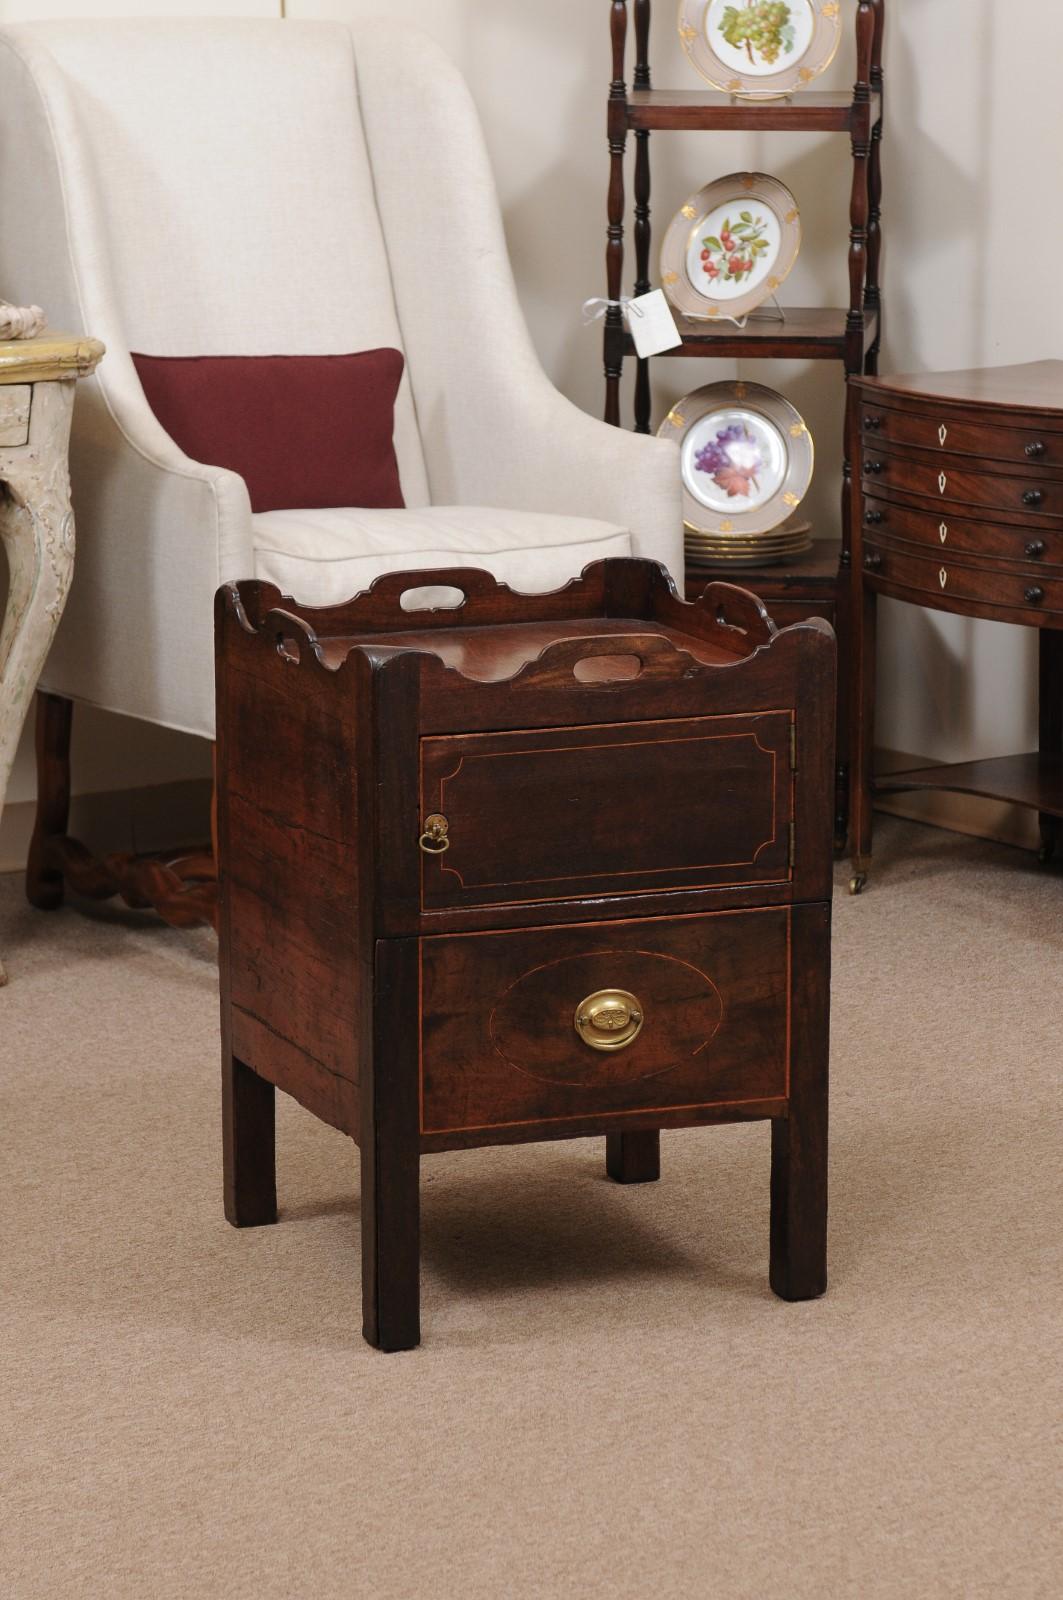 19th C English Bedside Commode w/ Cabinet, Drawer, & Tray Top in Mahogany & Pine For Sale 7